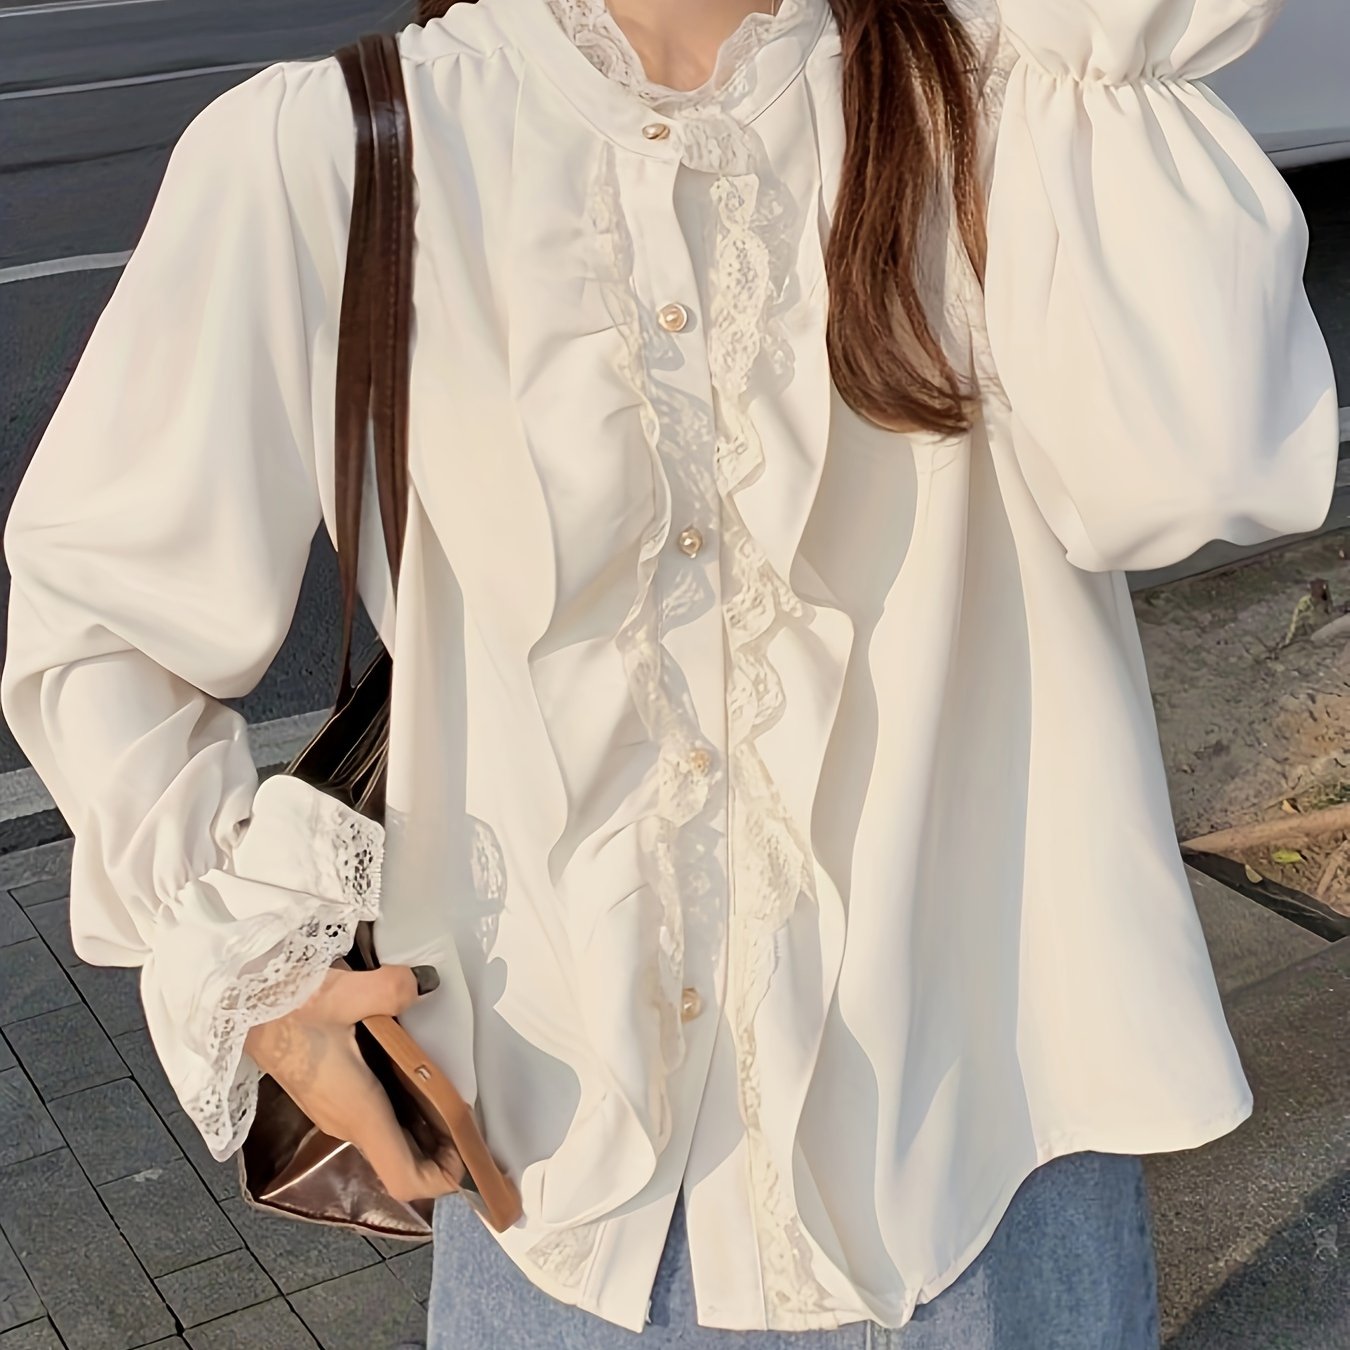 Antmvs Contrast Lace Ruffle Decor Blouse, Chic Button Front Long Sleeve Blouse, Women's Clothing